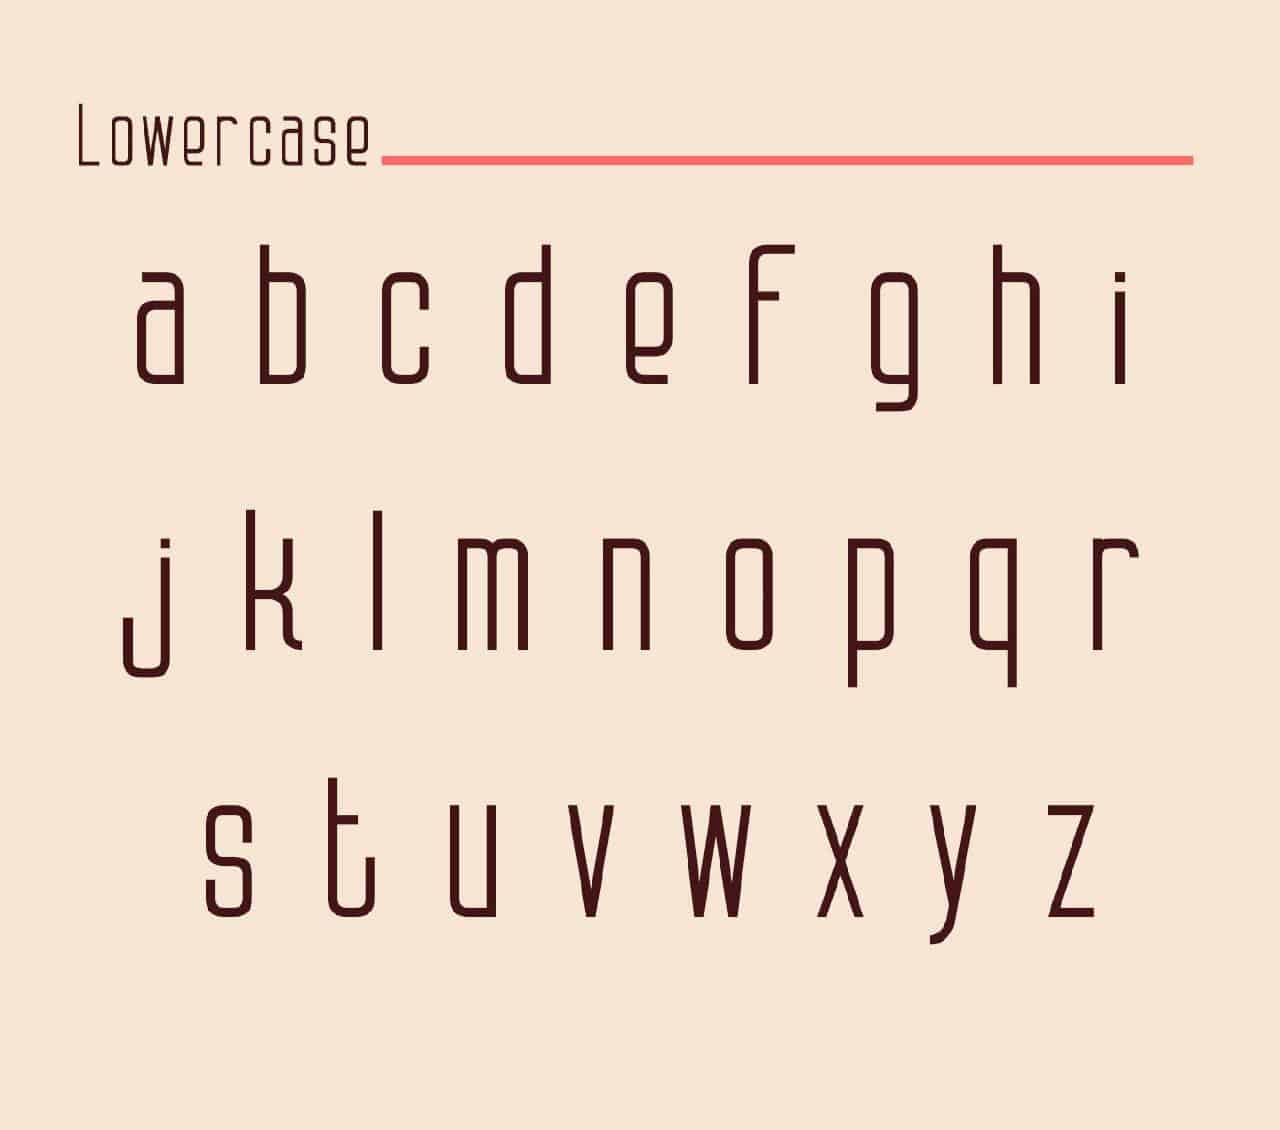 Download Daray font (typeface)